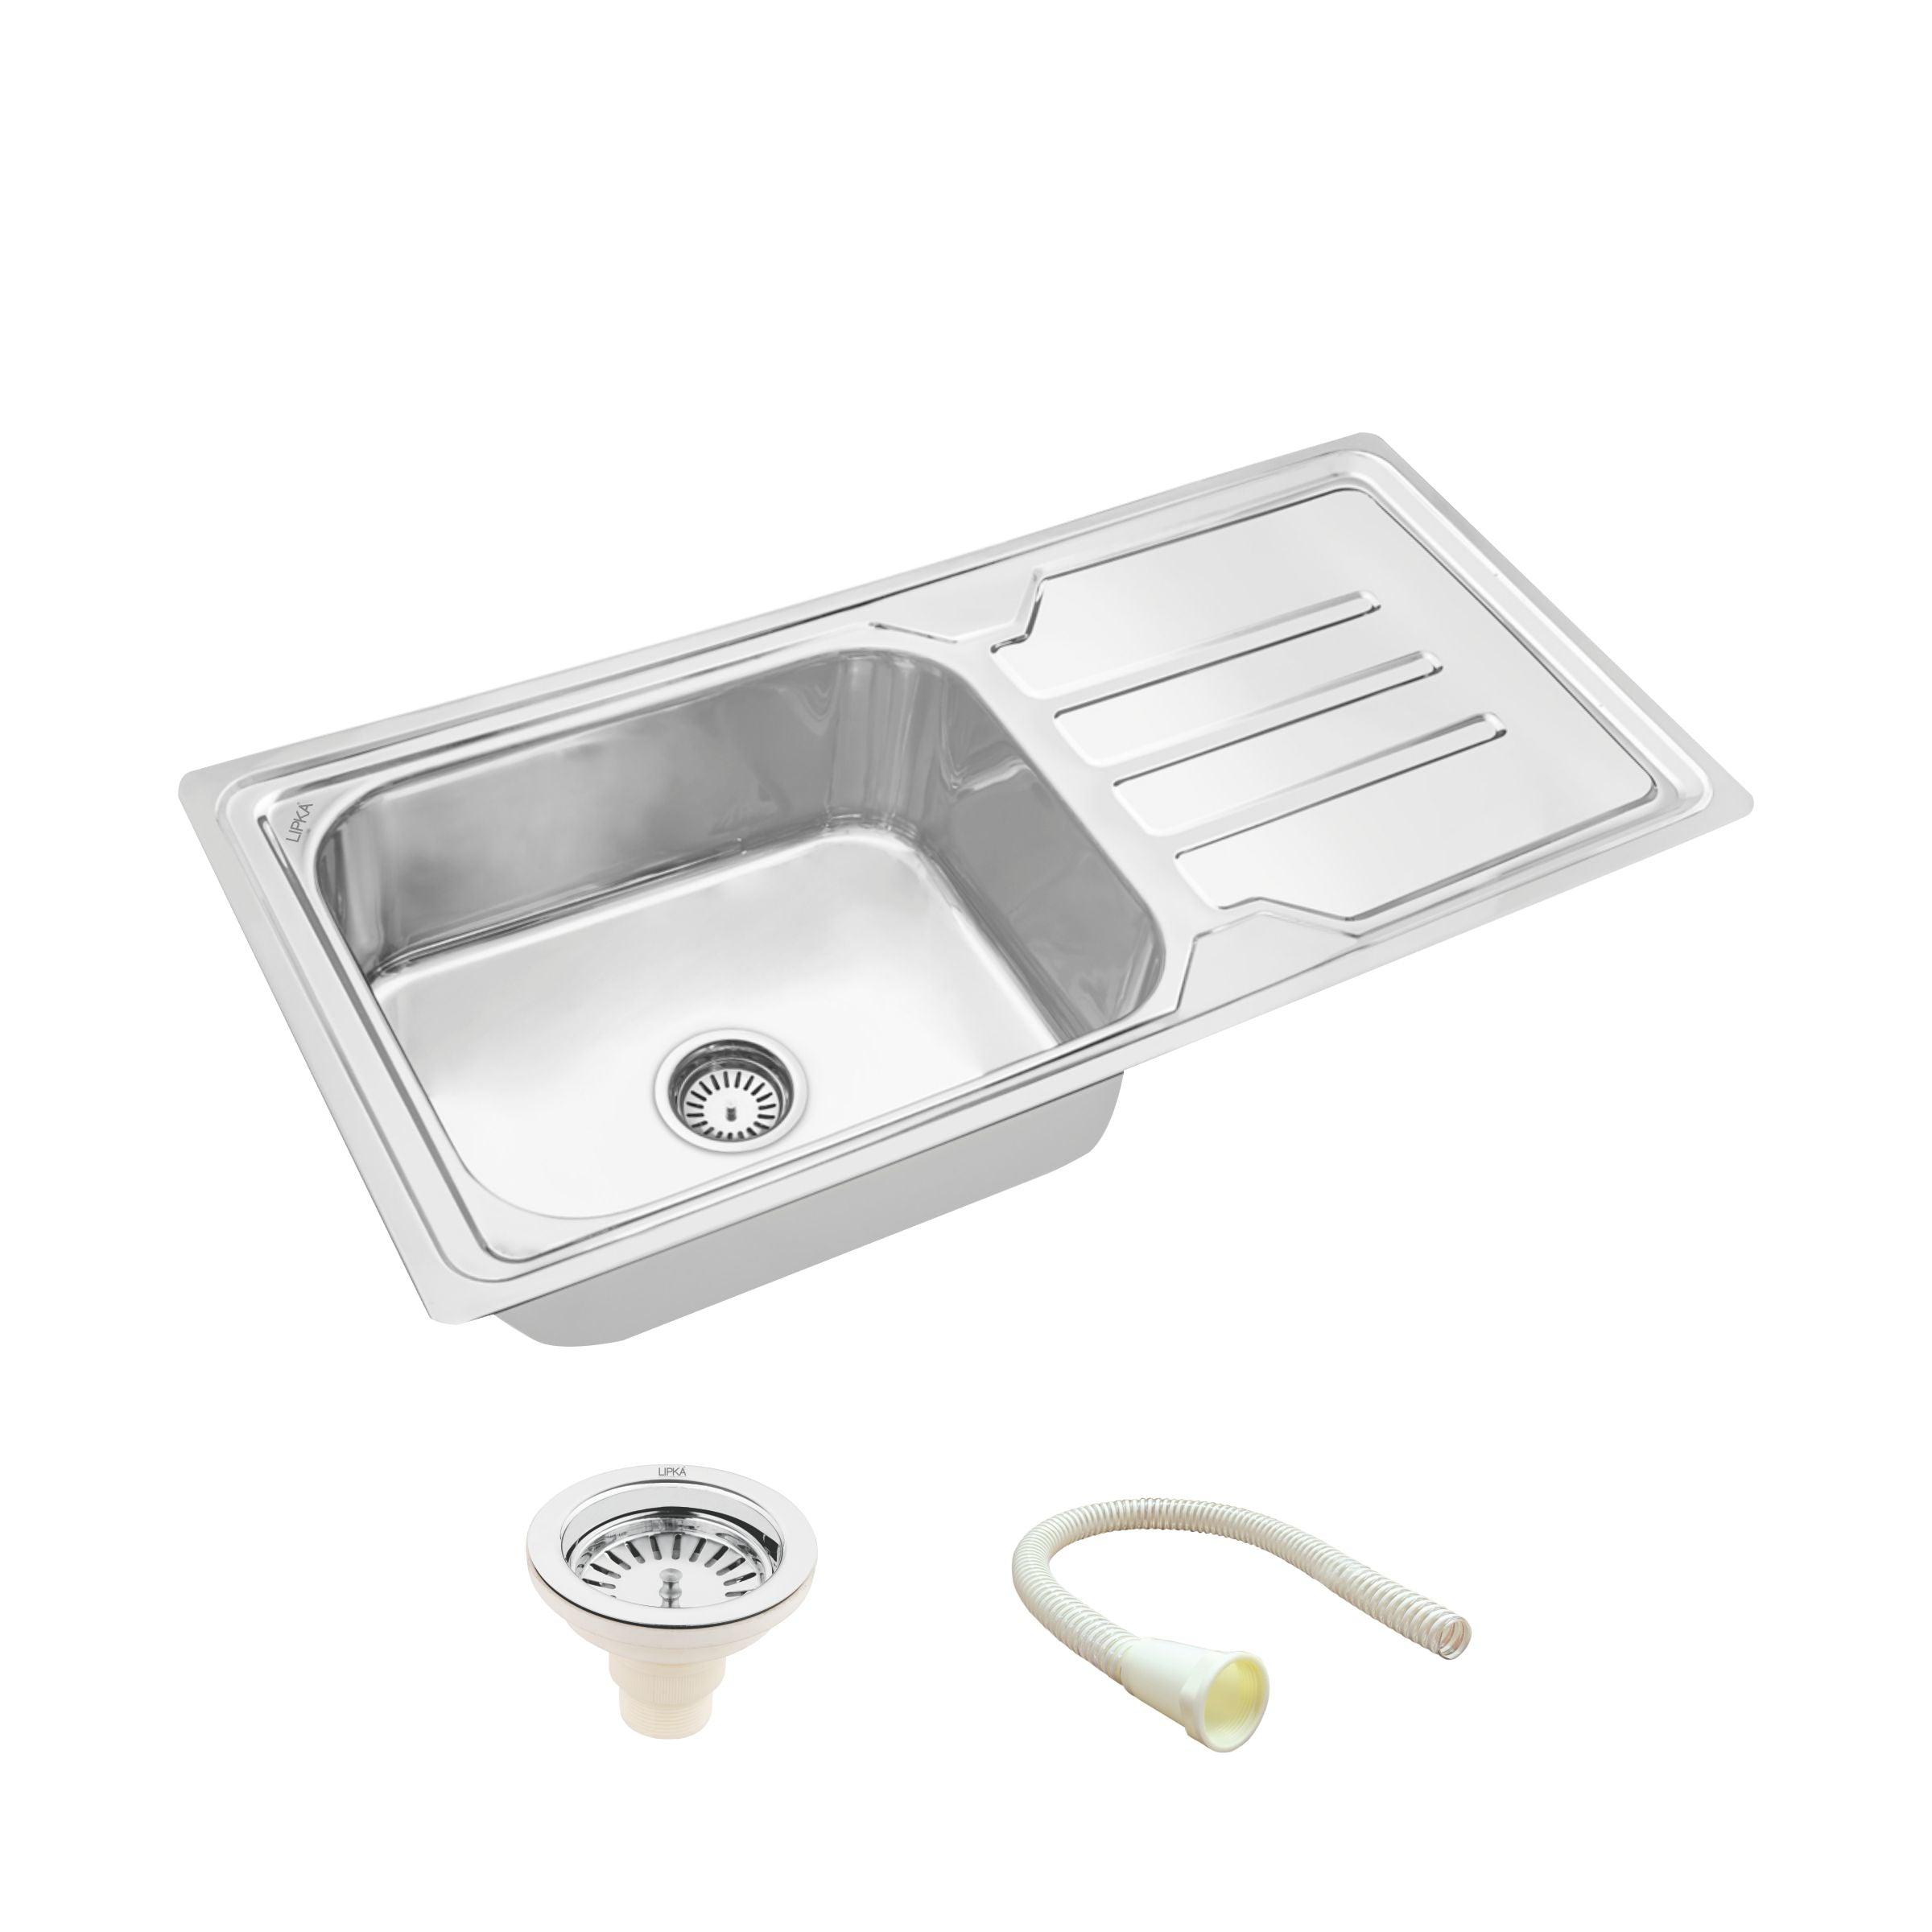 Square Single Bowl 304-Grade Kitchen Sink with Drainboard (42 x 20 x 9 Inches) - LIPKA